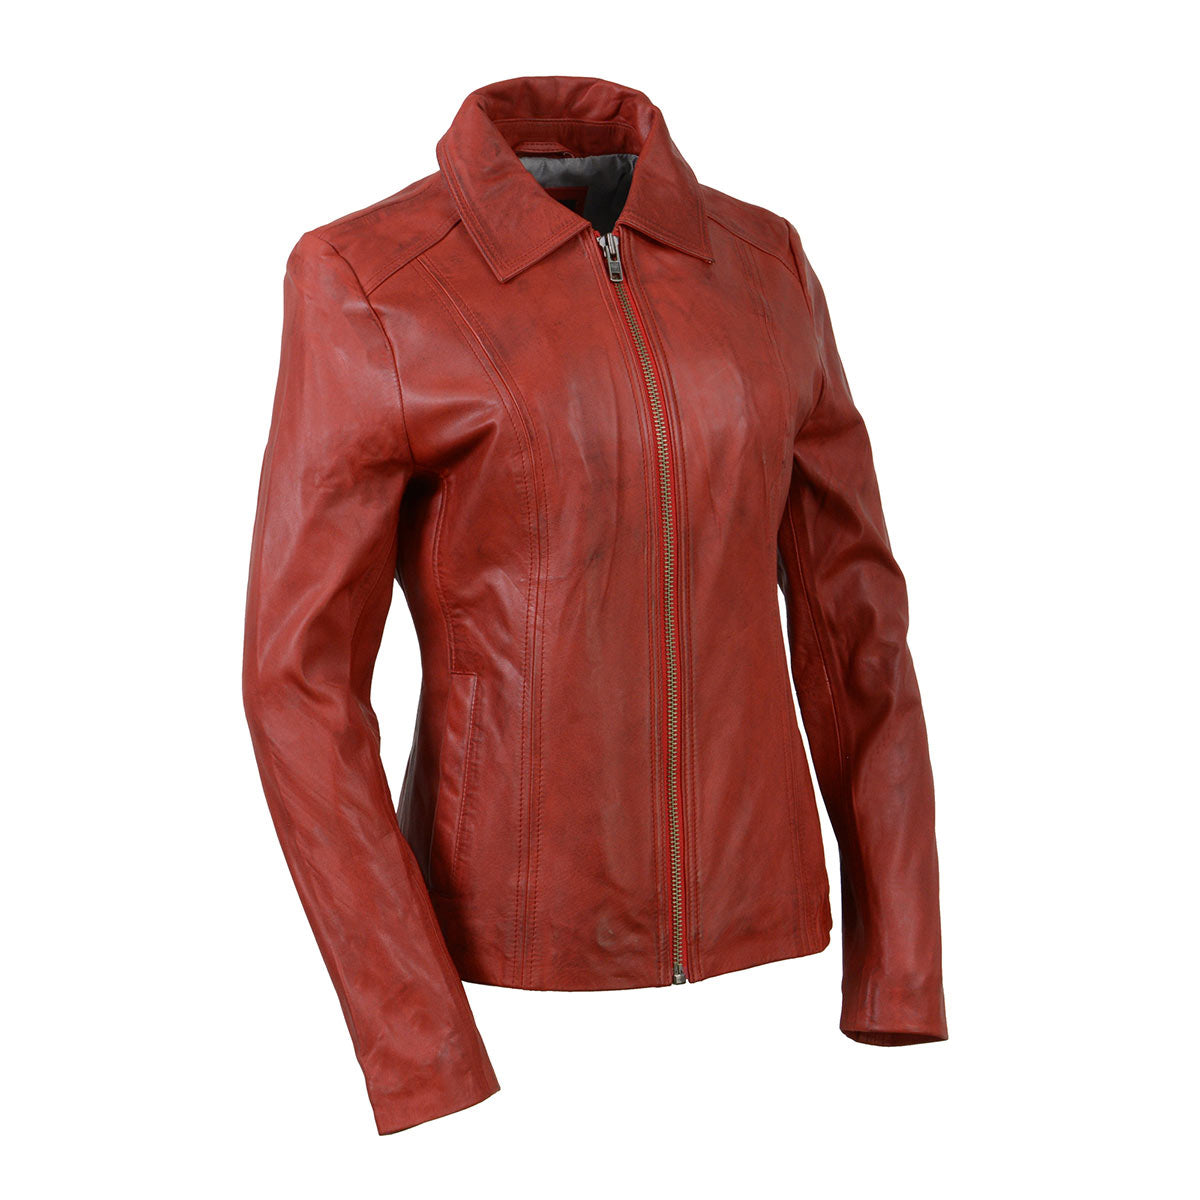 Milwaukee Leather SFL2850 Women's Classic Red Zippered Motorcycle Style Fashion Leather Jacket with Shirt Style Collar